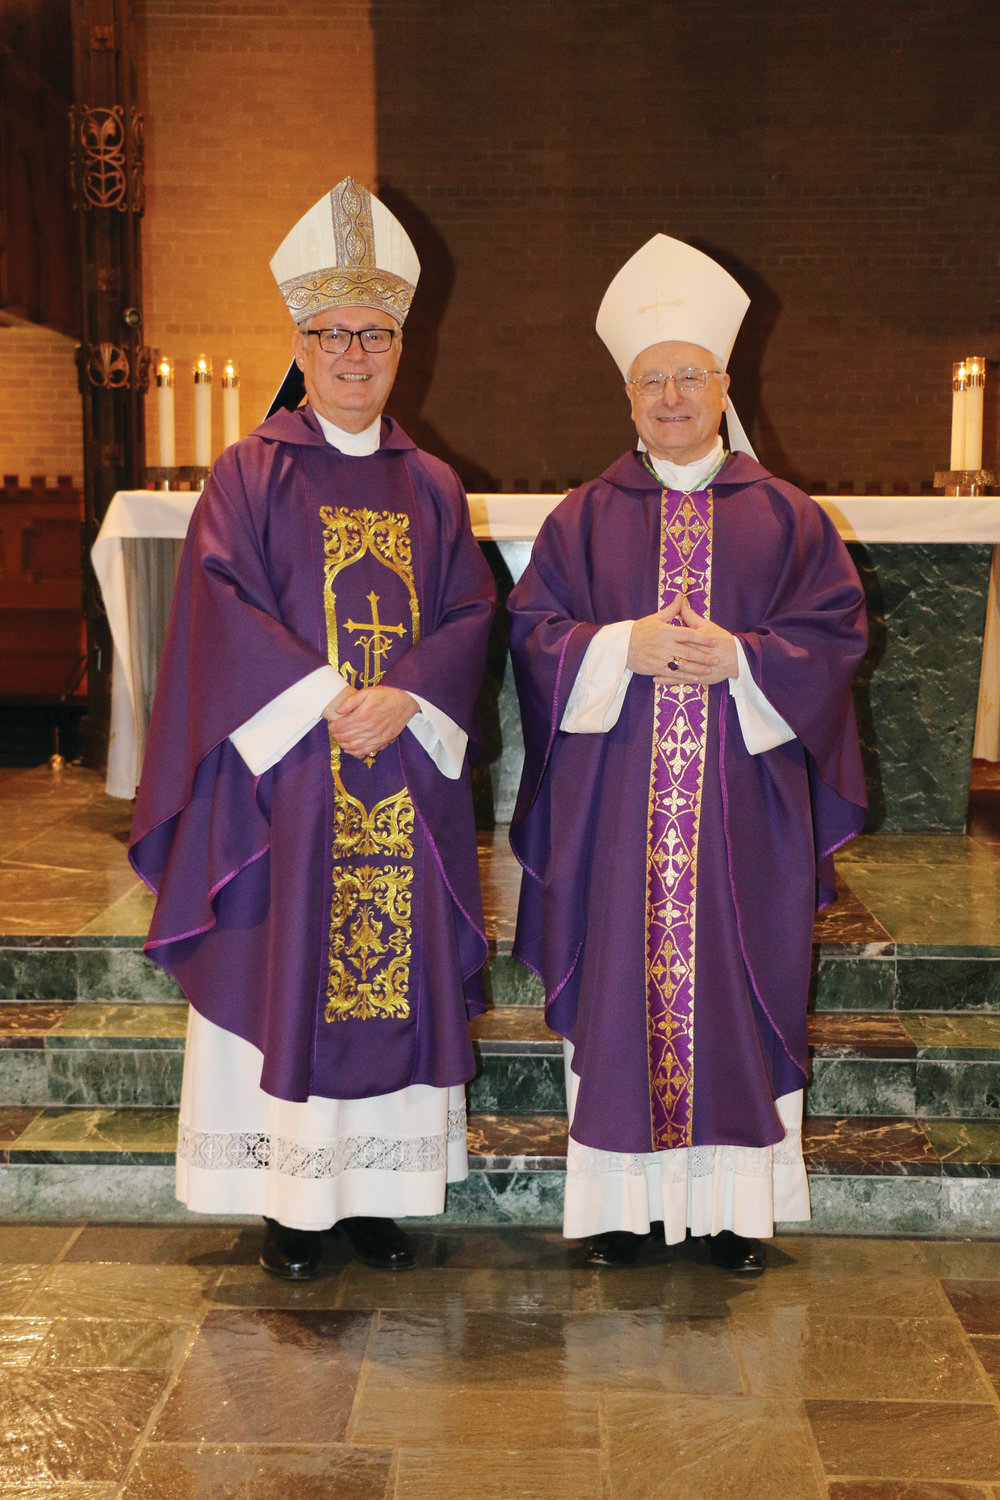 Bishop Tobin pictured with Bishop Evans following Mass held prior to the diocesan employee Christmas dinner on December 11.